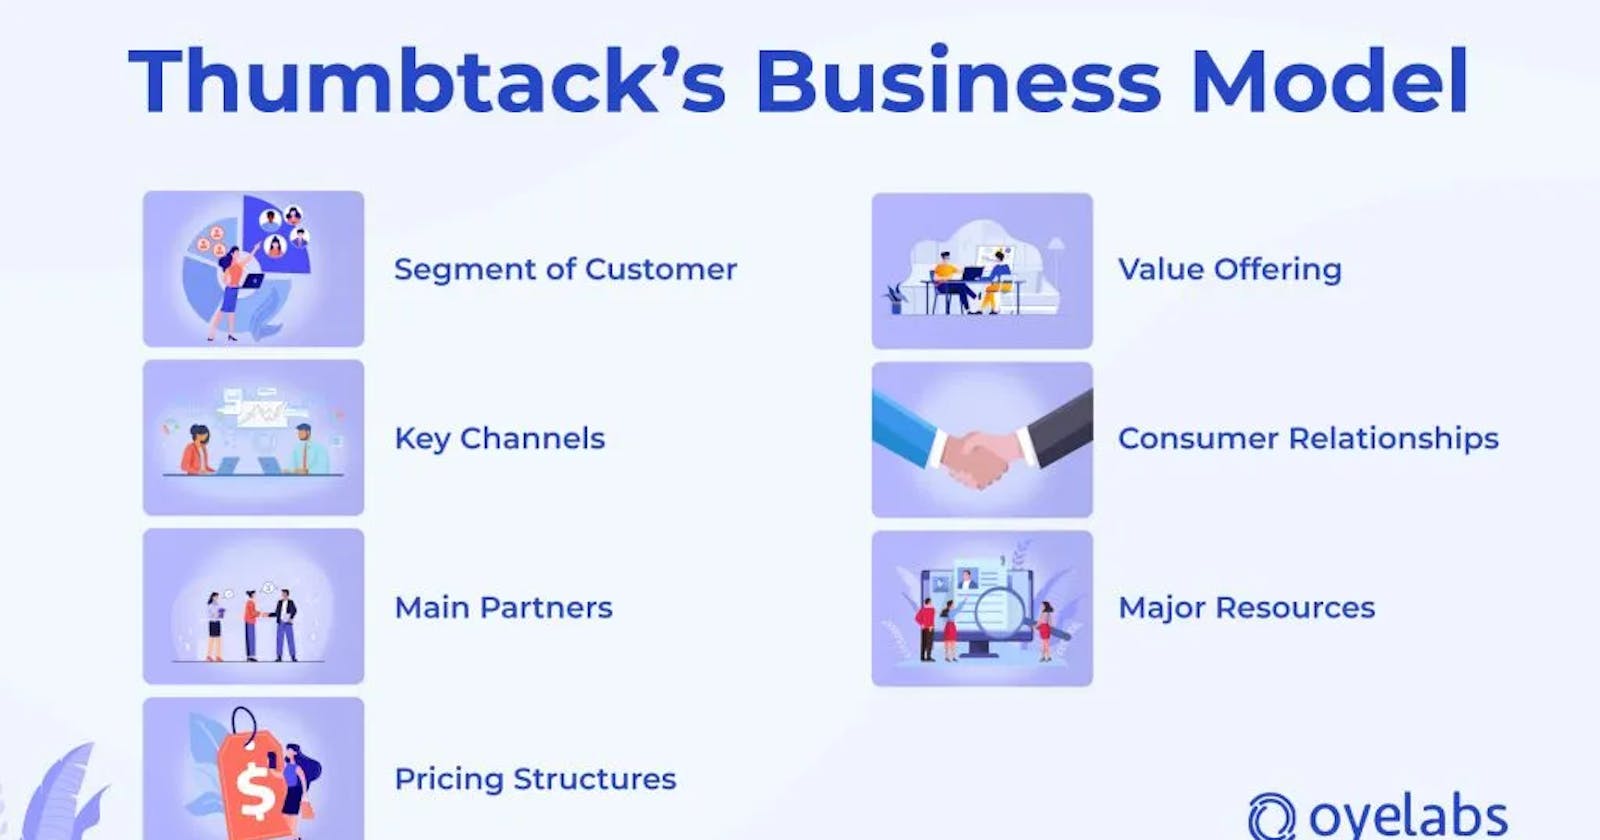 How Does Thumbtack Make Money? Exploring the Business Model